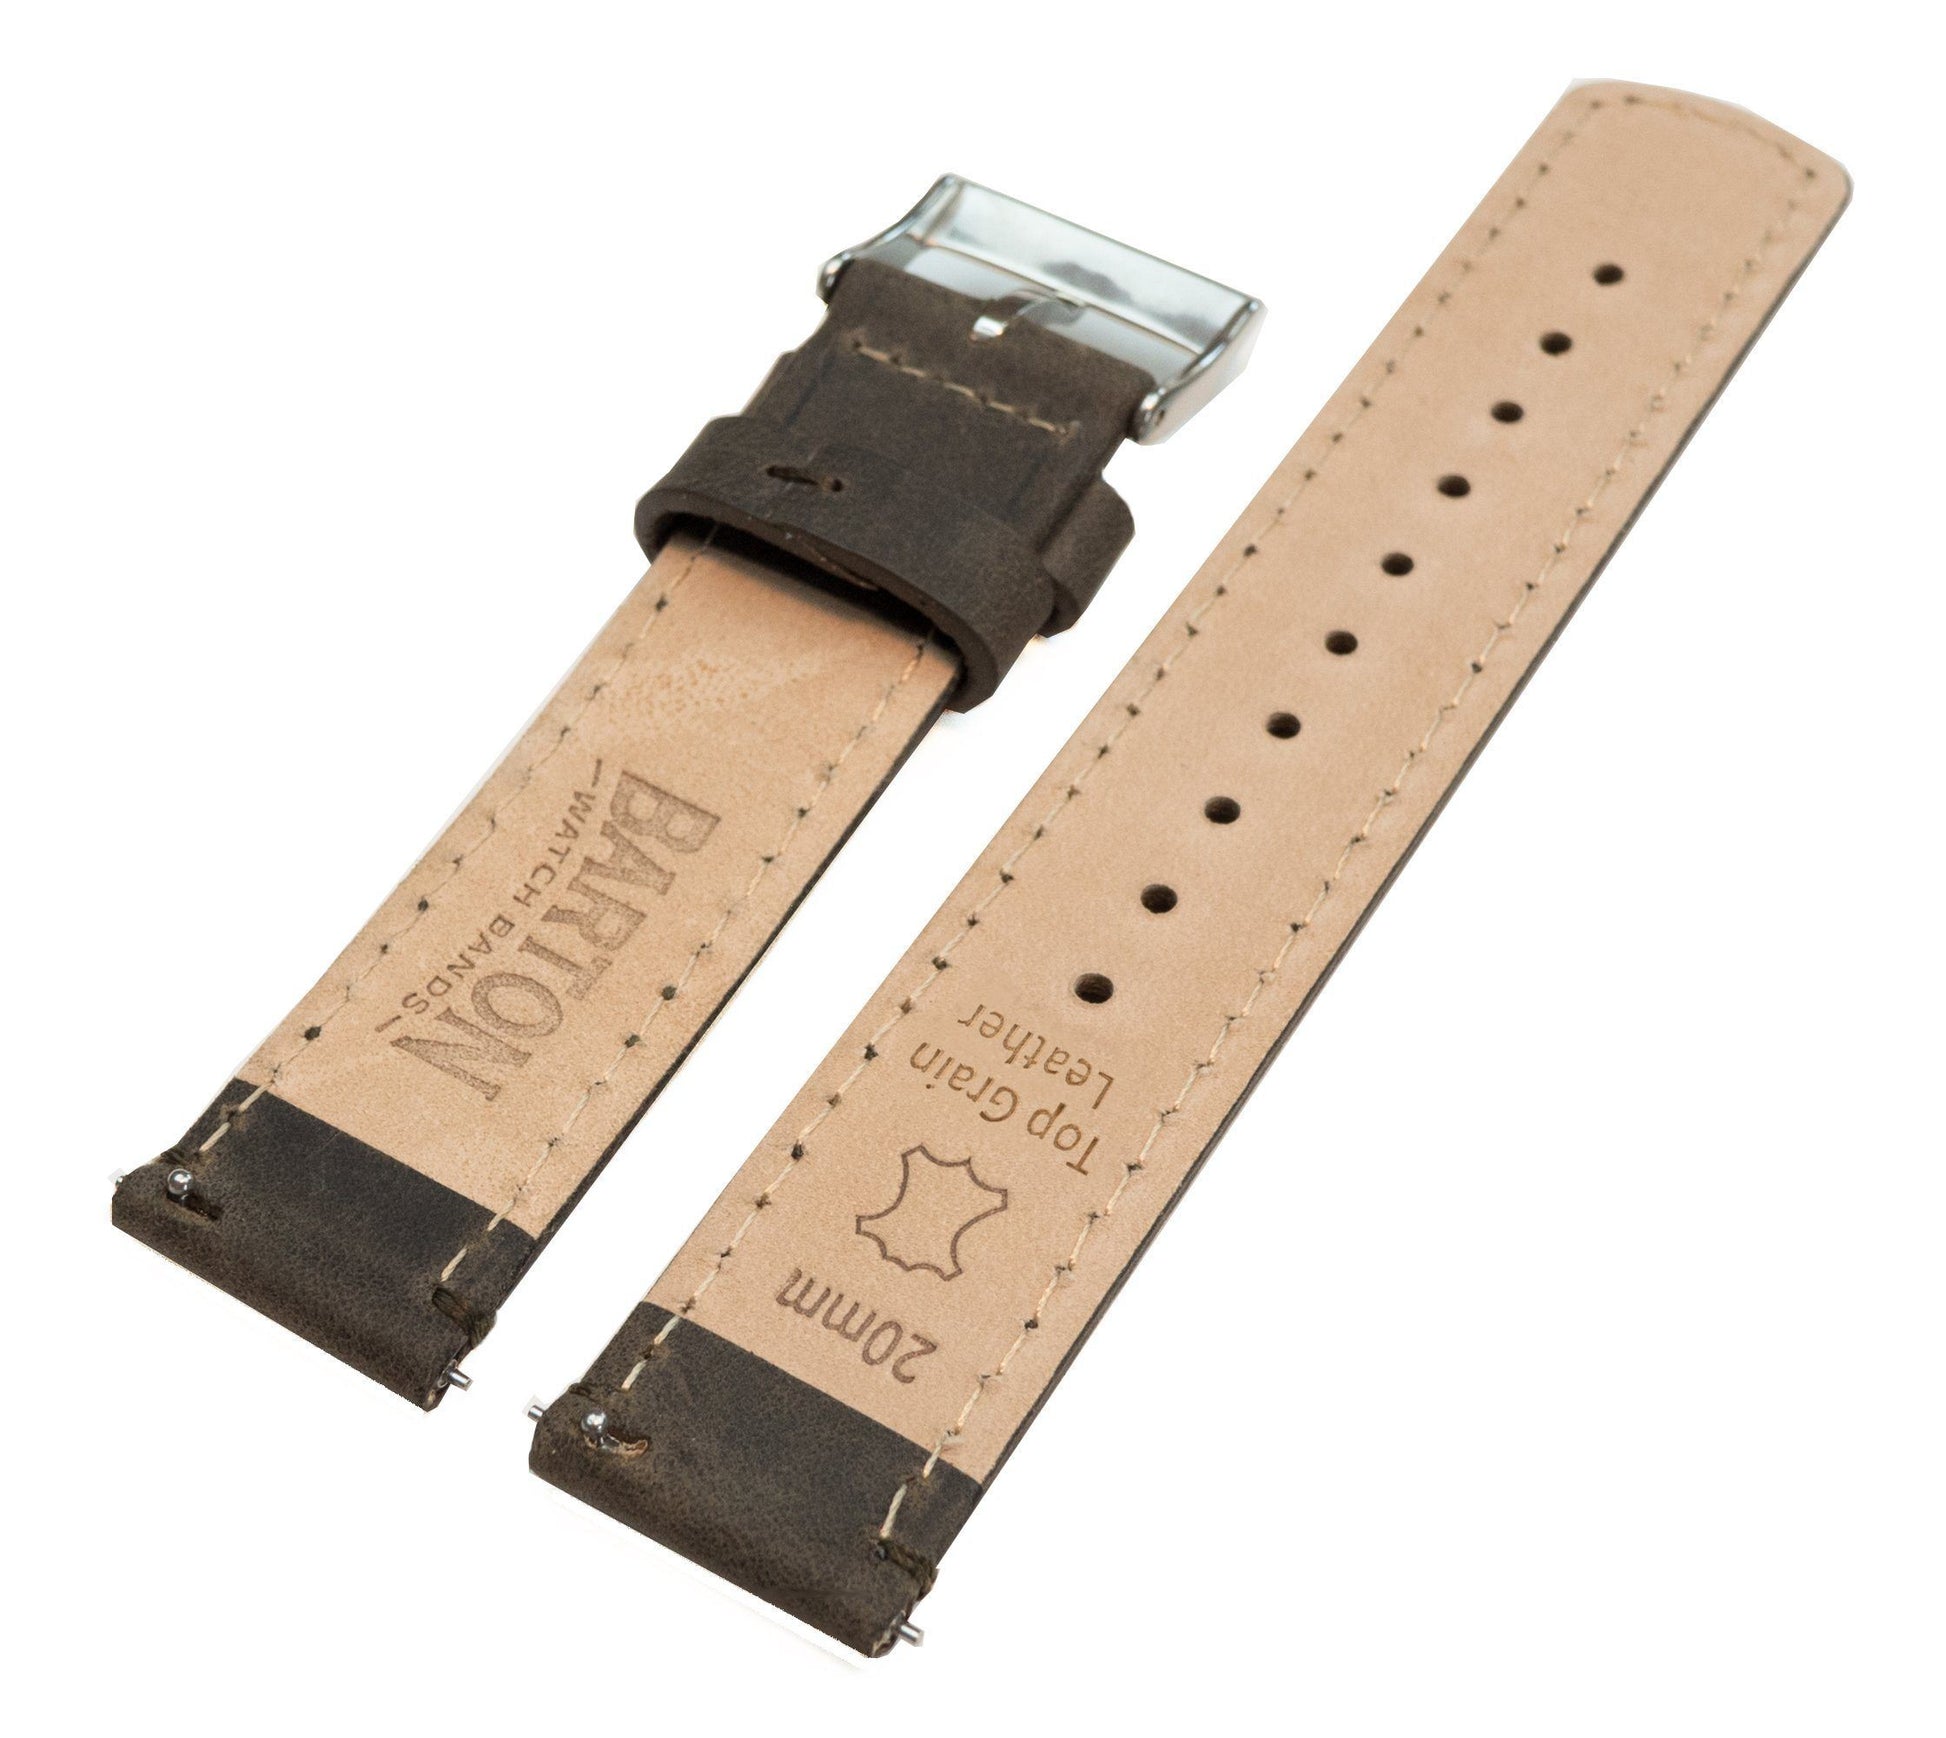 Withings Nokia Activité and Steel HR | Espresso Brown Leather & Stitching - Barton Watch Bands